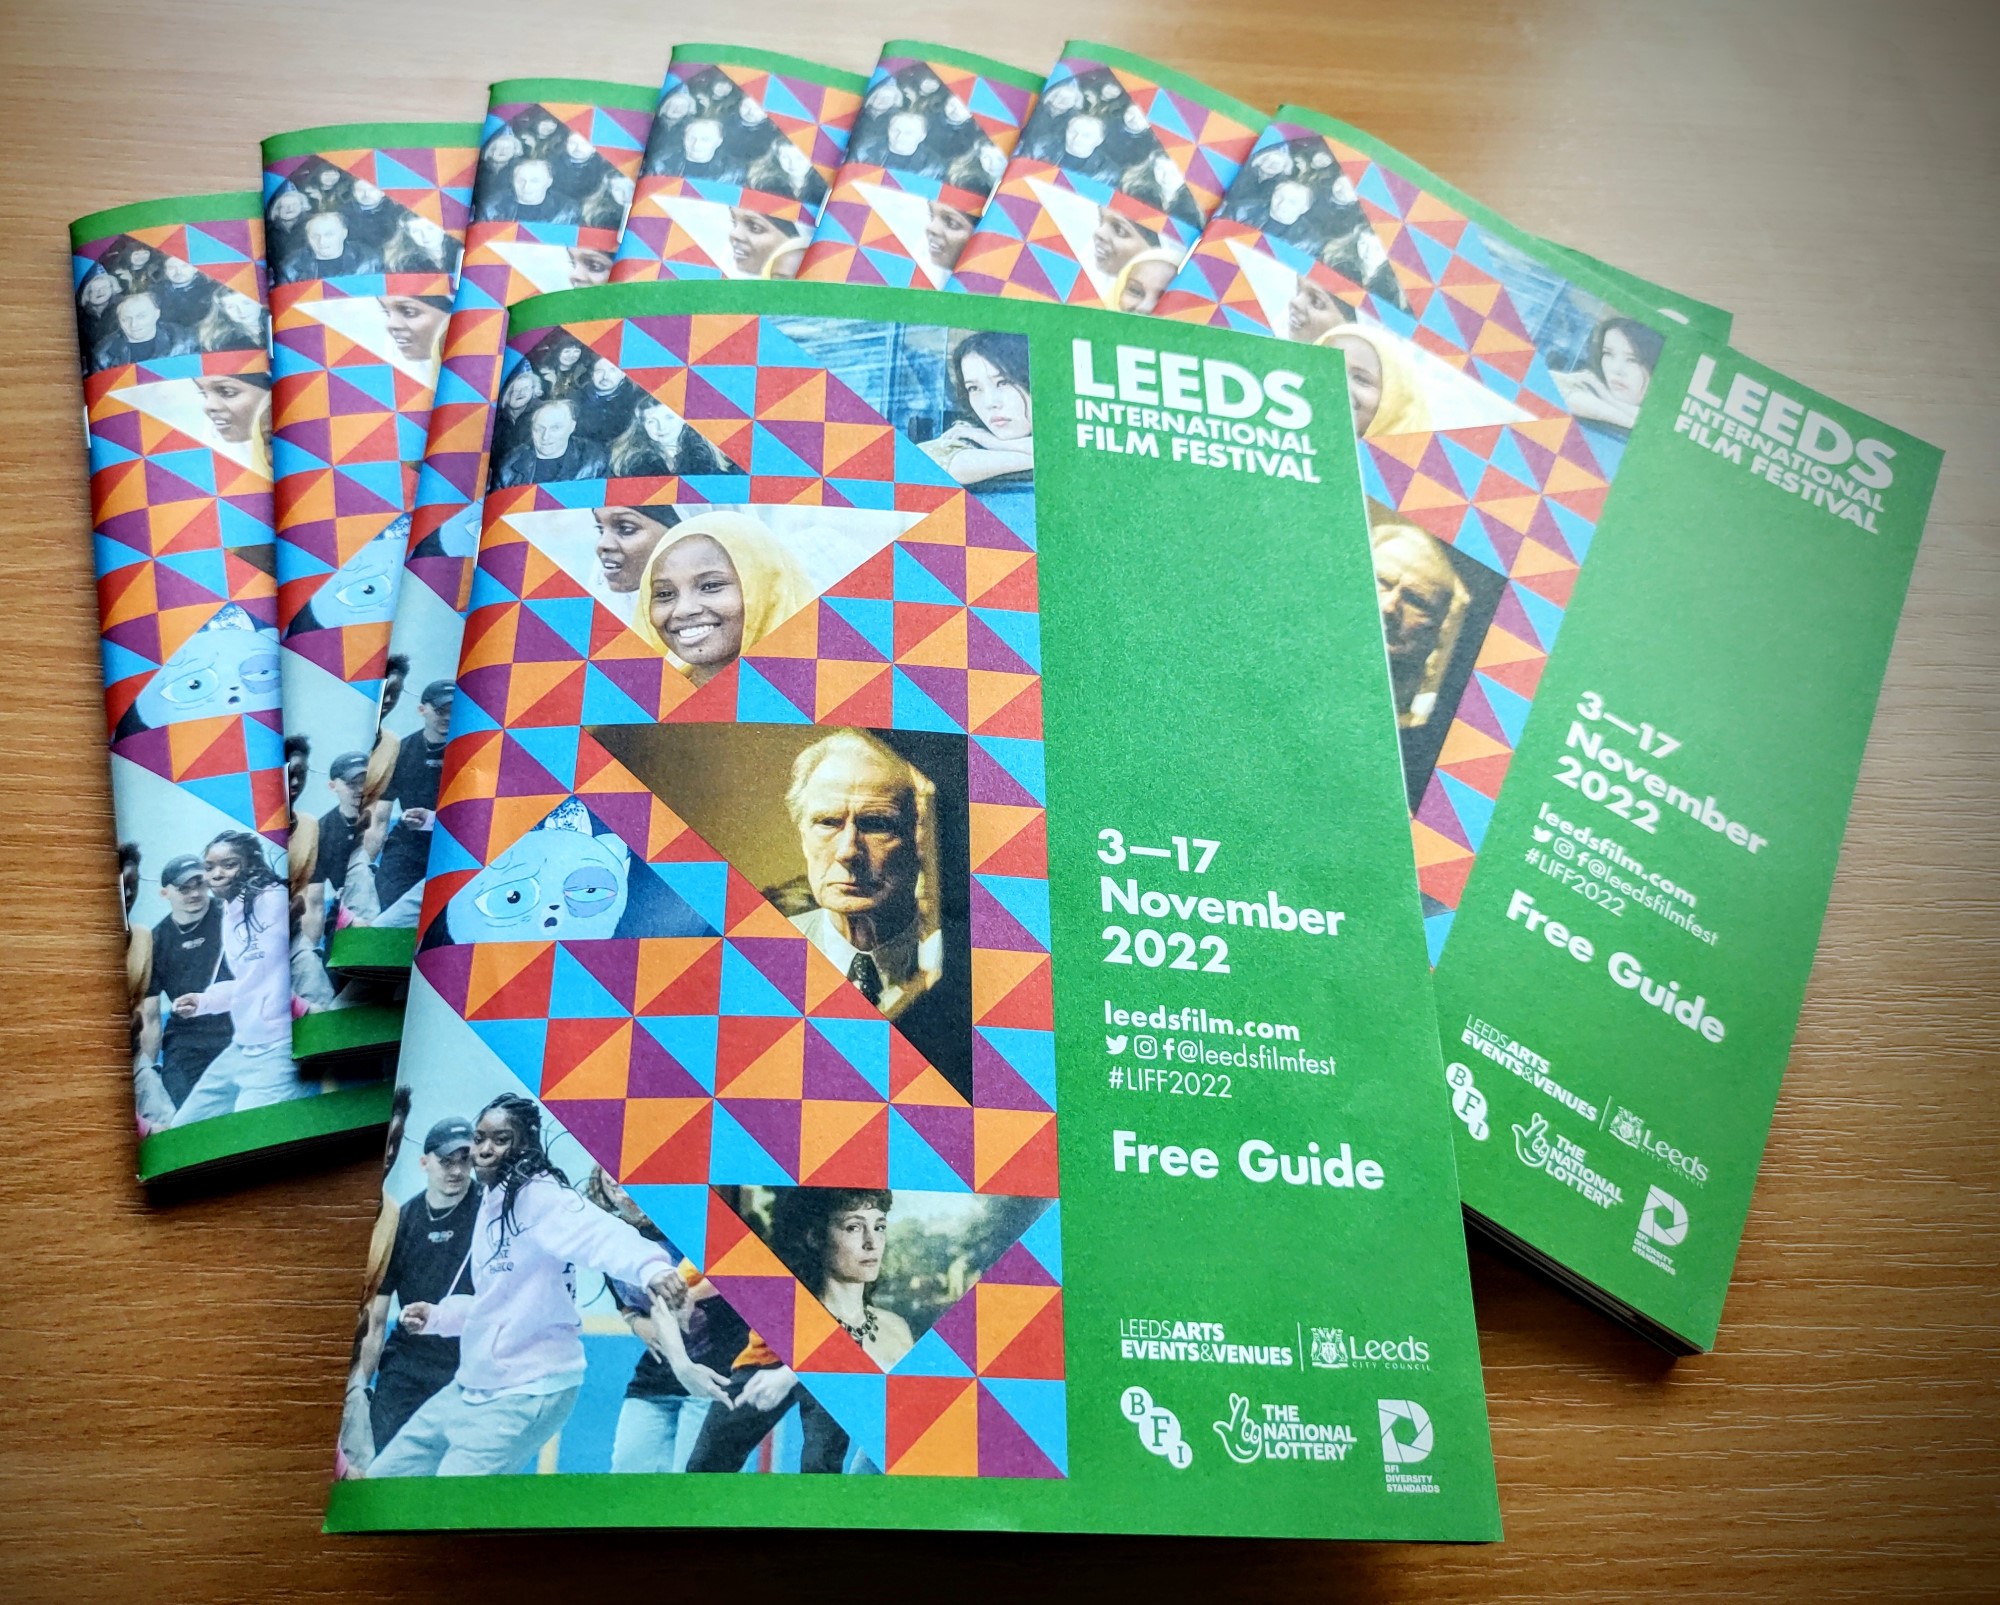 A stack of green coloured guides with images from various films and branded with the Leeds International Film Festival logo. 